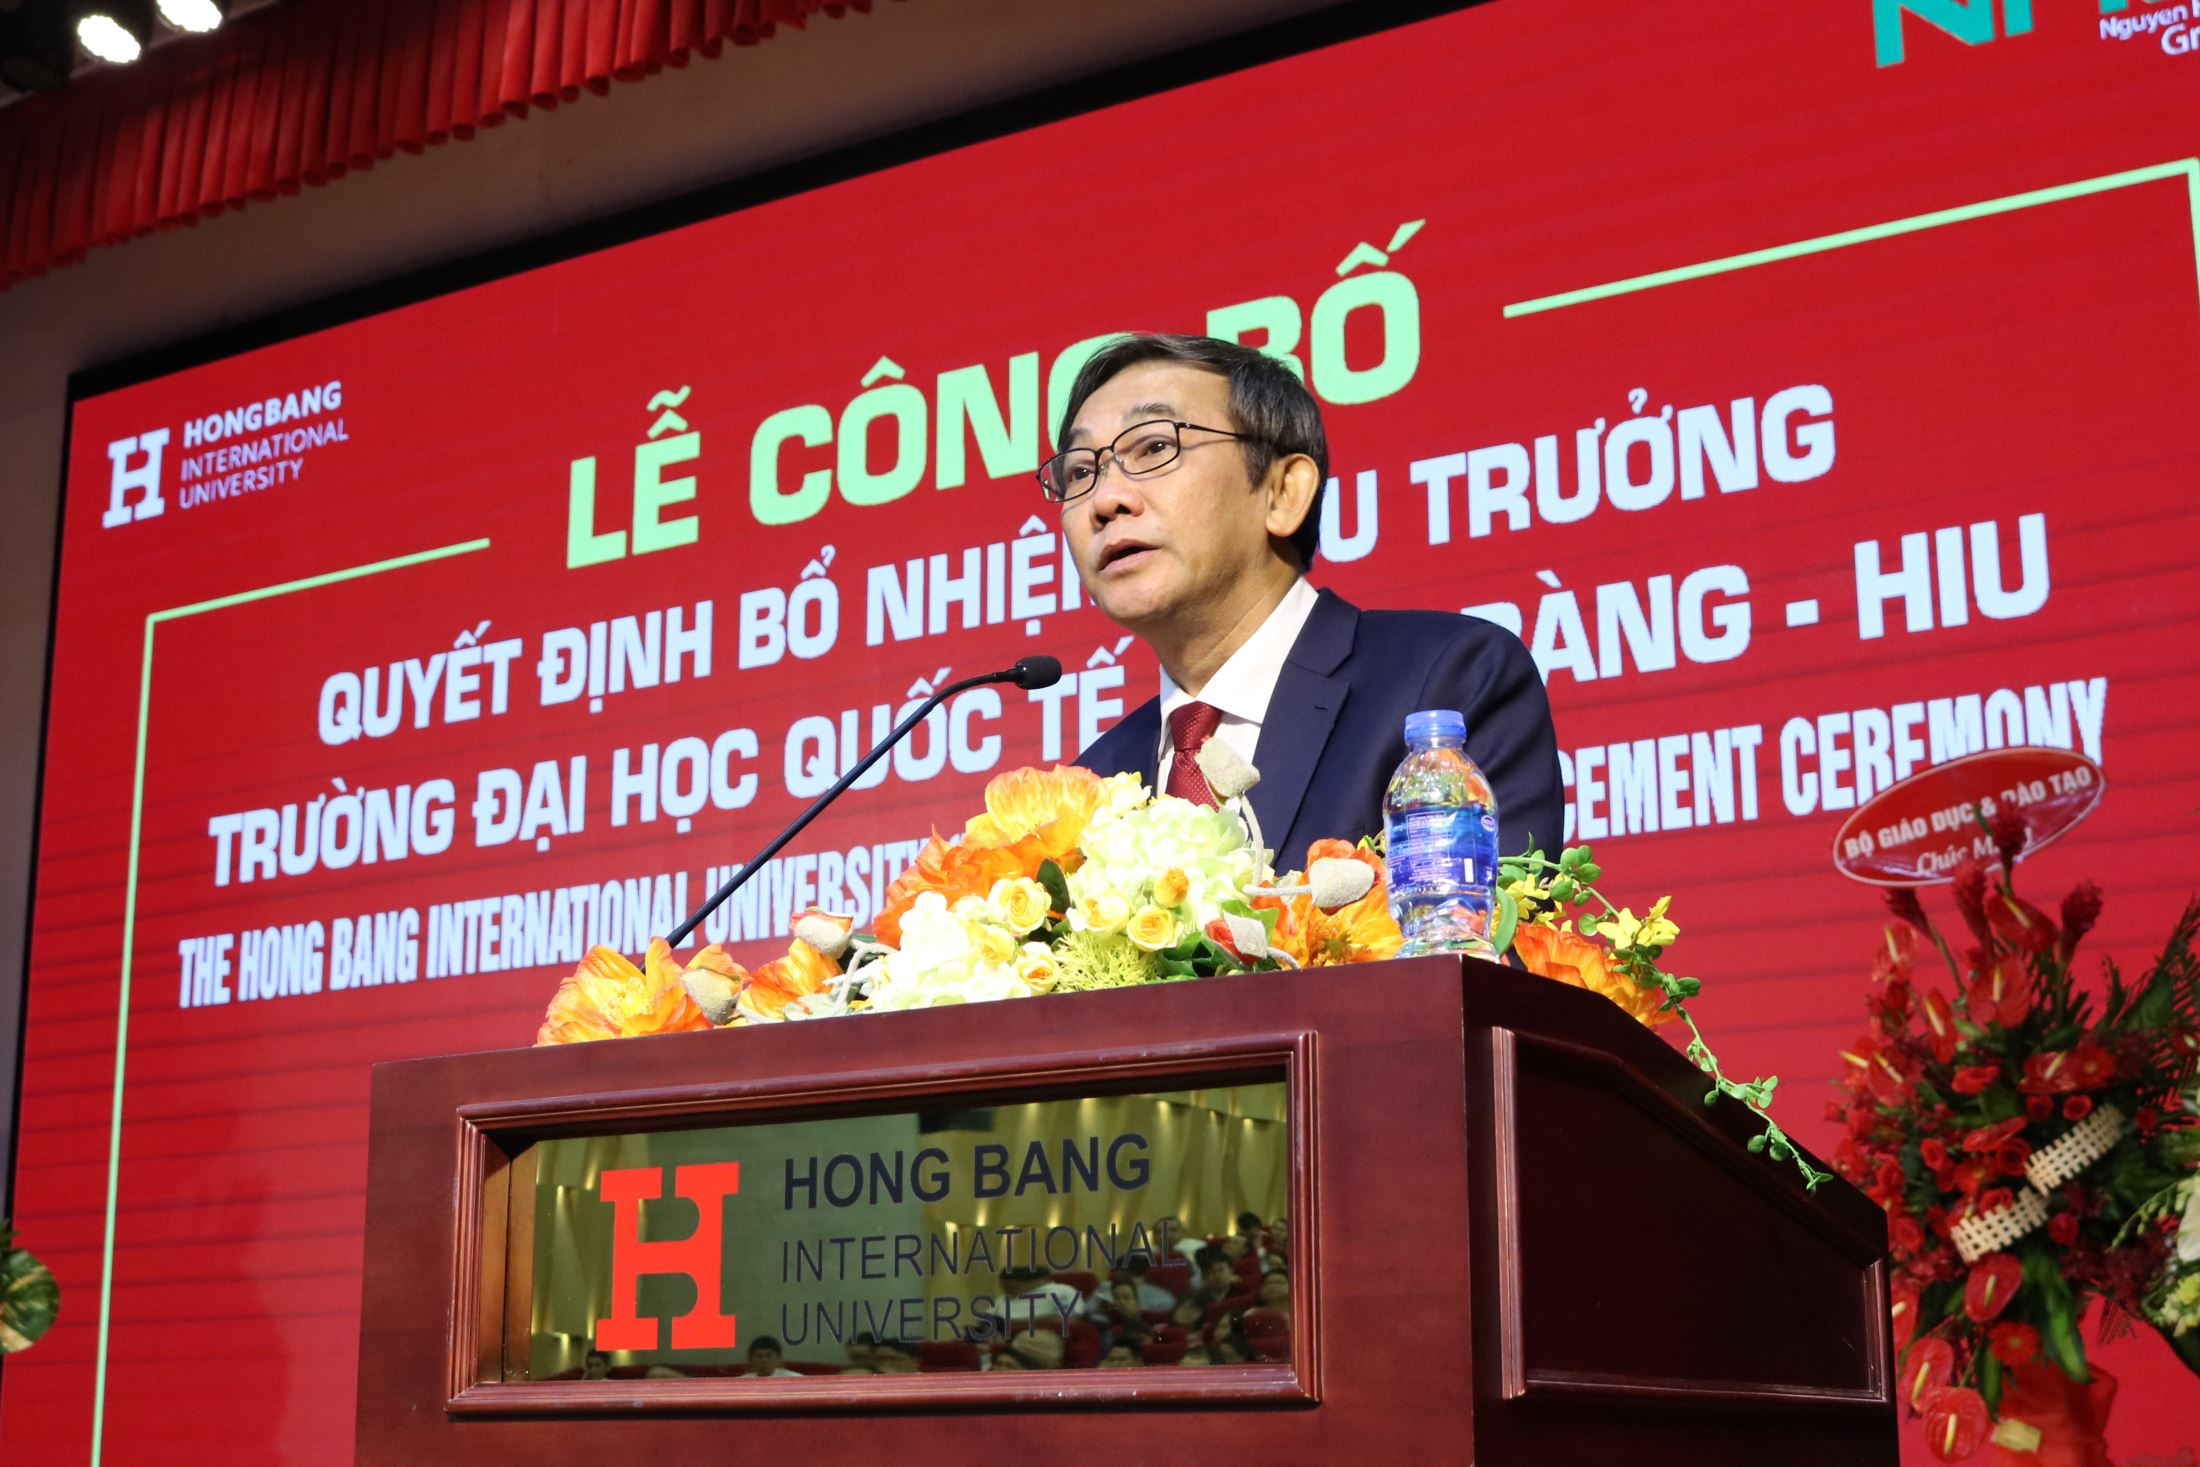 Associate Professor, Dr. Ho Thanh Phong, the new president of HIU giving speech at the event